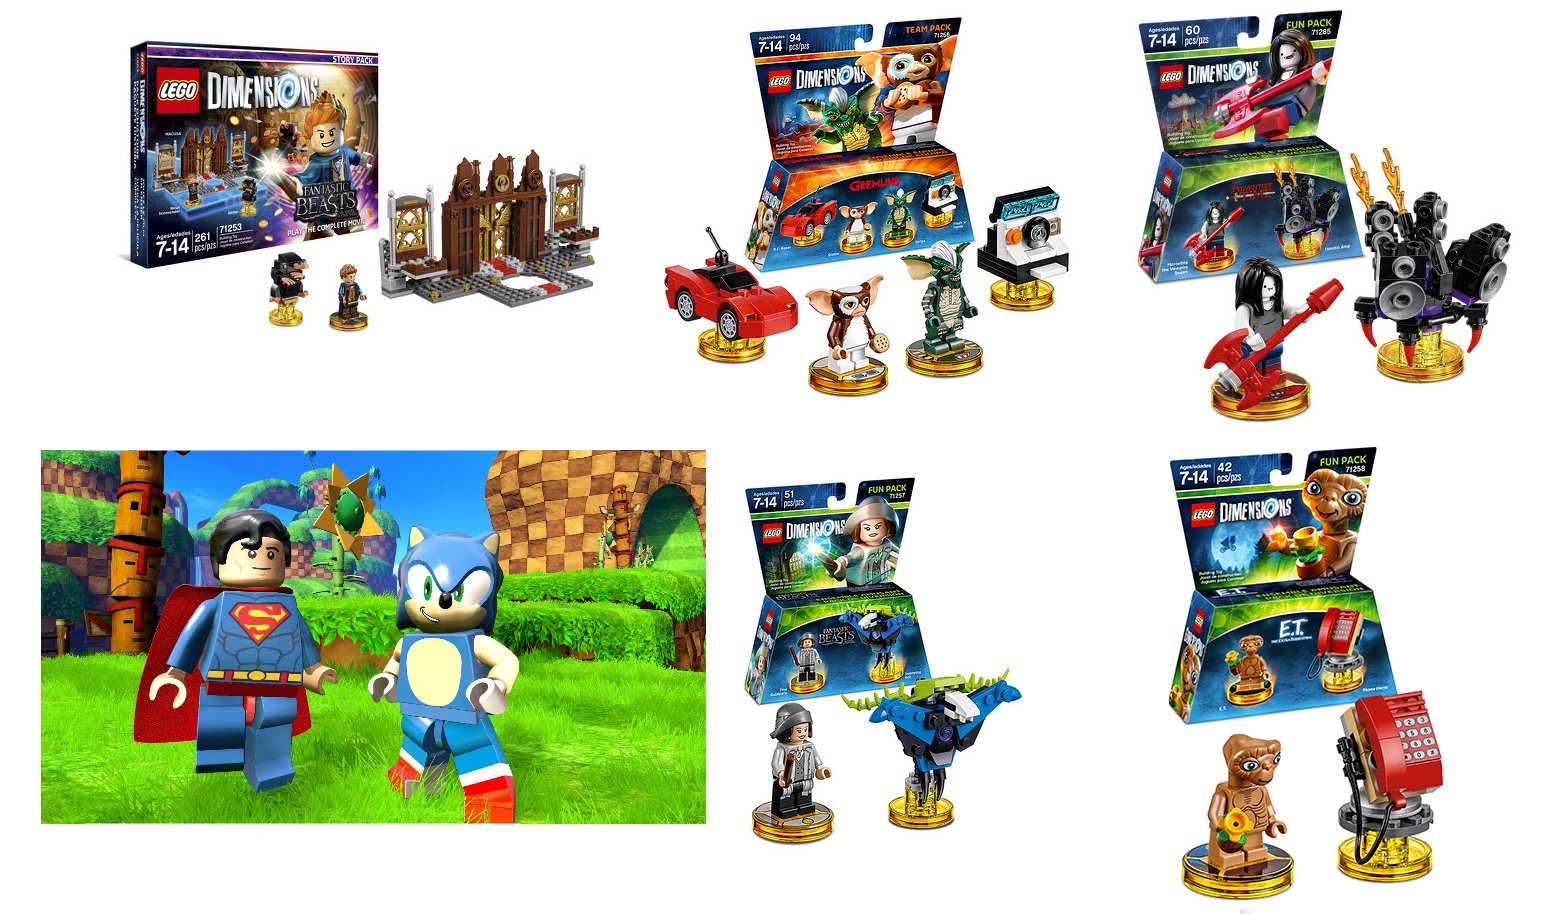 Here's what Sonic the Hedgehog will look like in Lego Dimensions this Fall